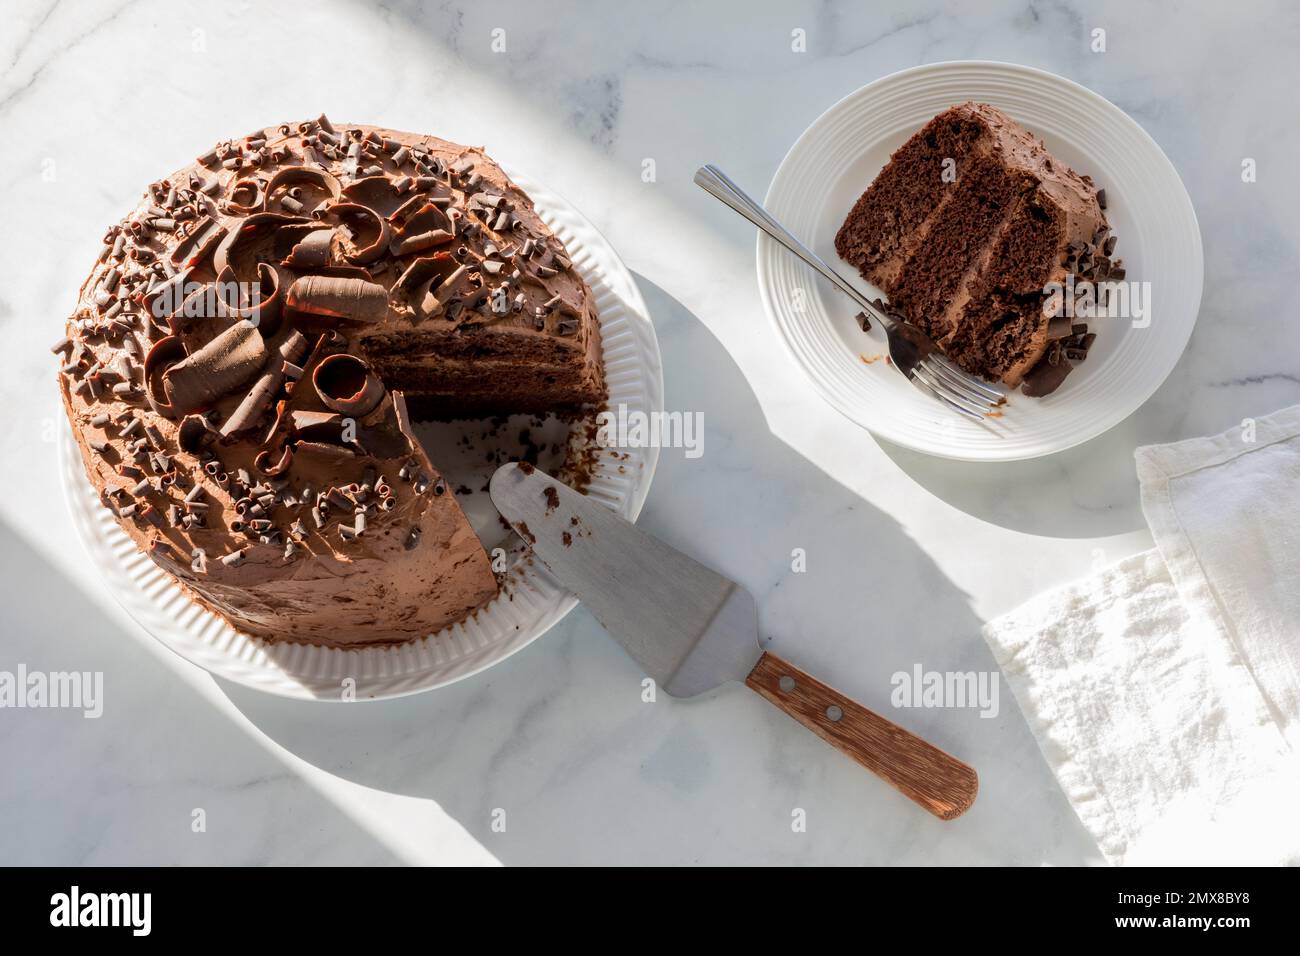 A low sugar and low carb homemade chocolate cake, in bright sunlight. Stock Photo